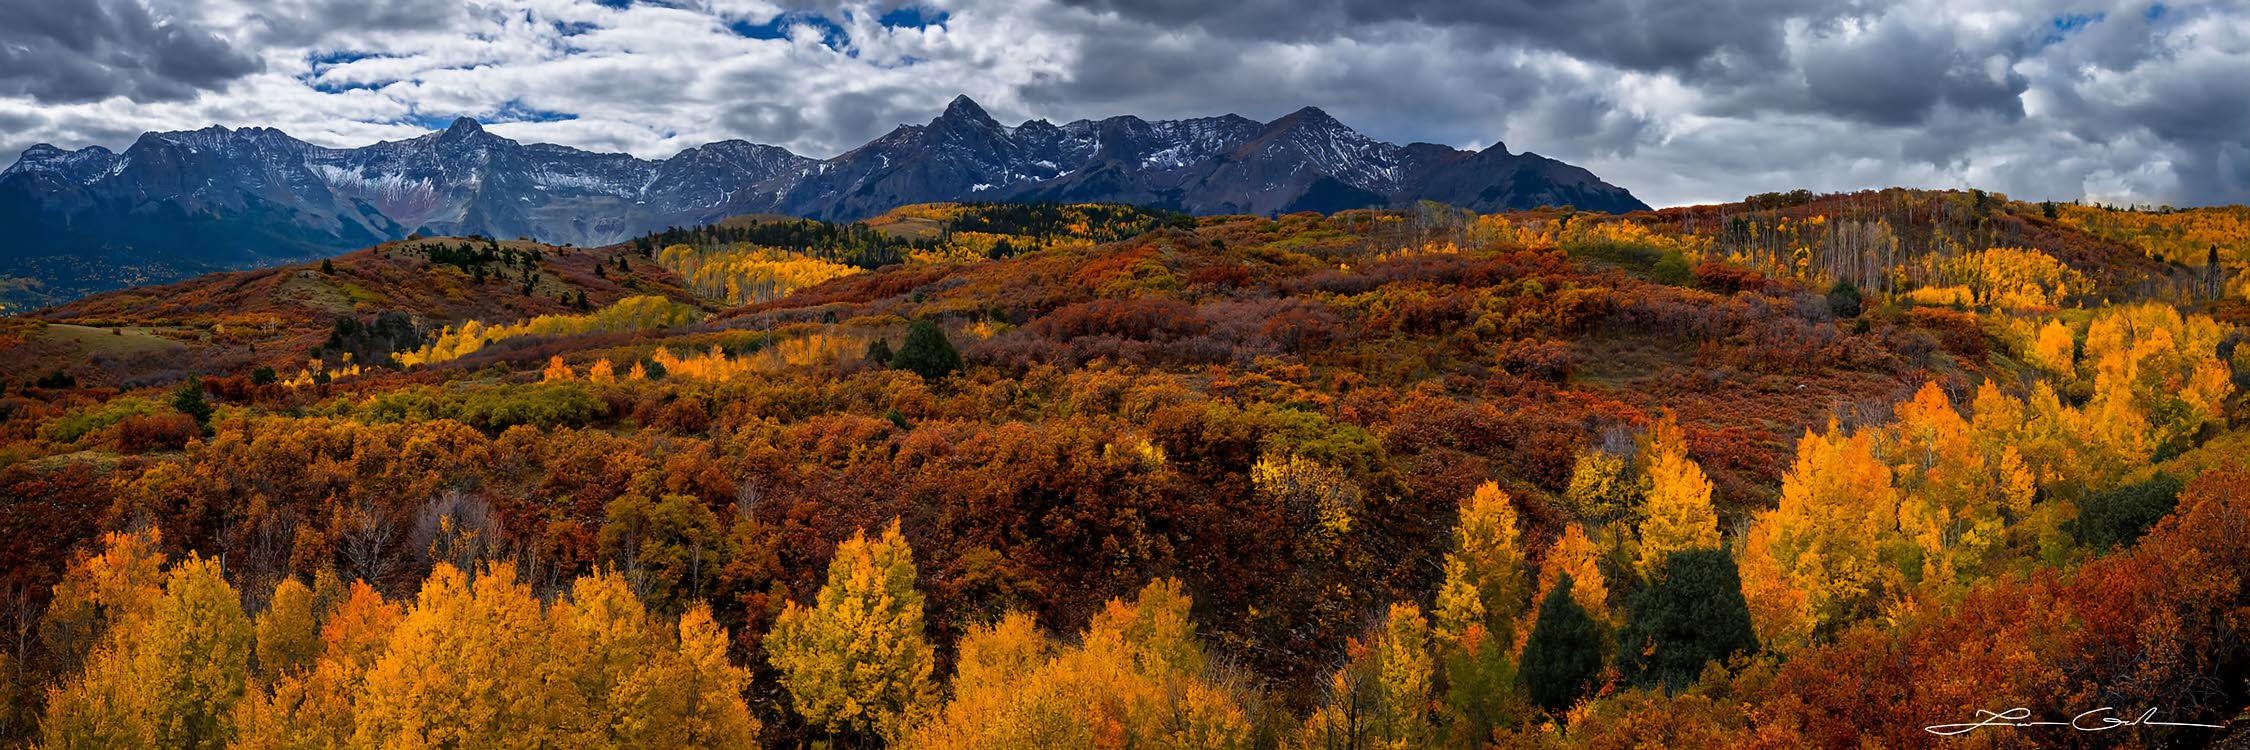 Orange aspens and fall color shrubs with Colorado mountains in the background